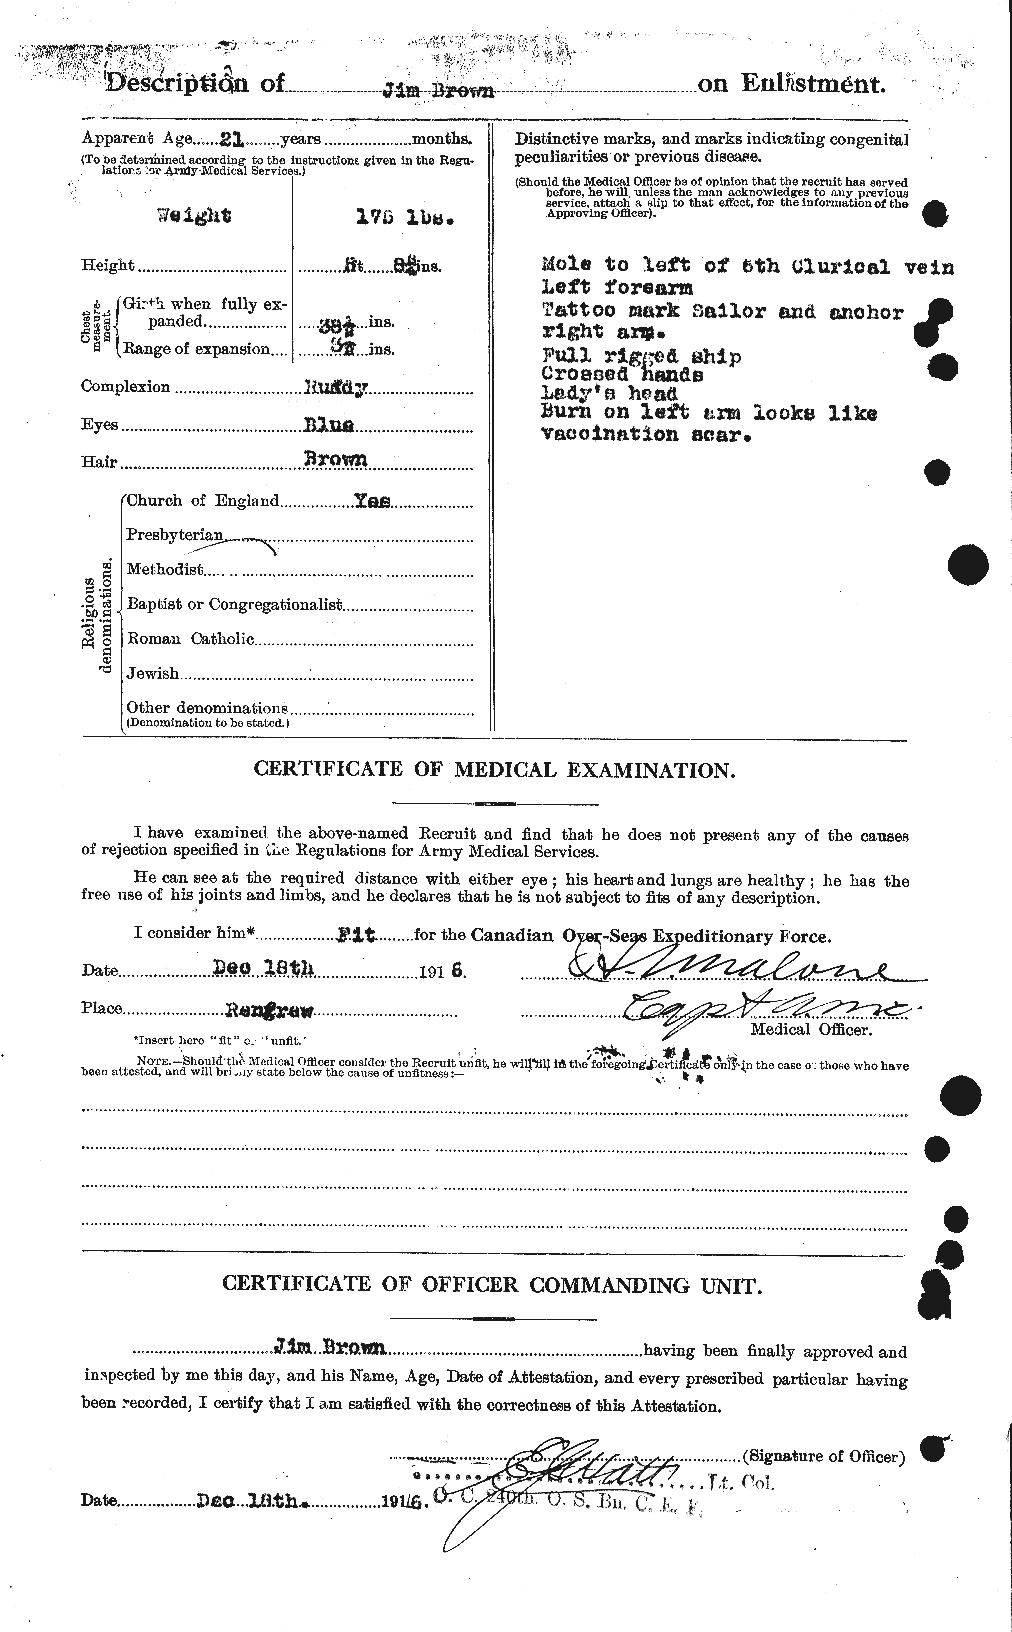 Personnel Records of the First World War - CEF 265766b